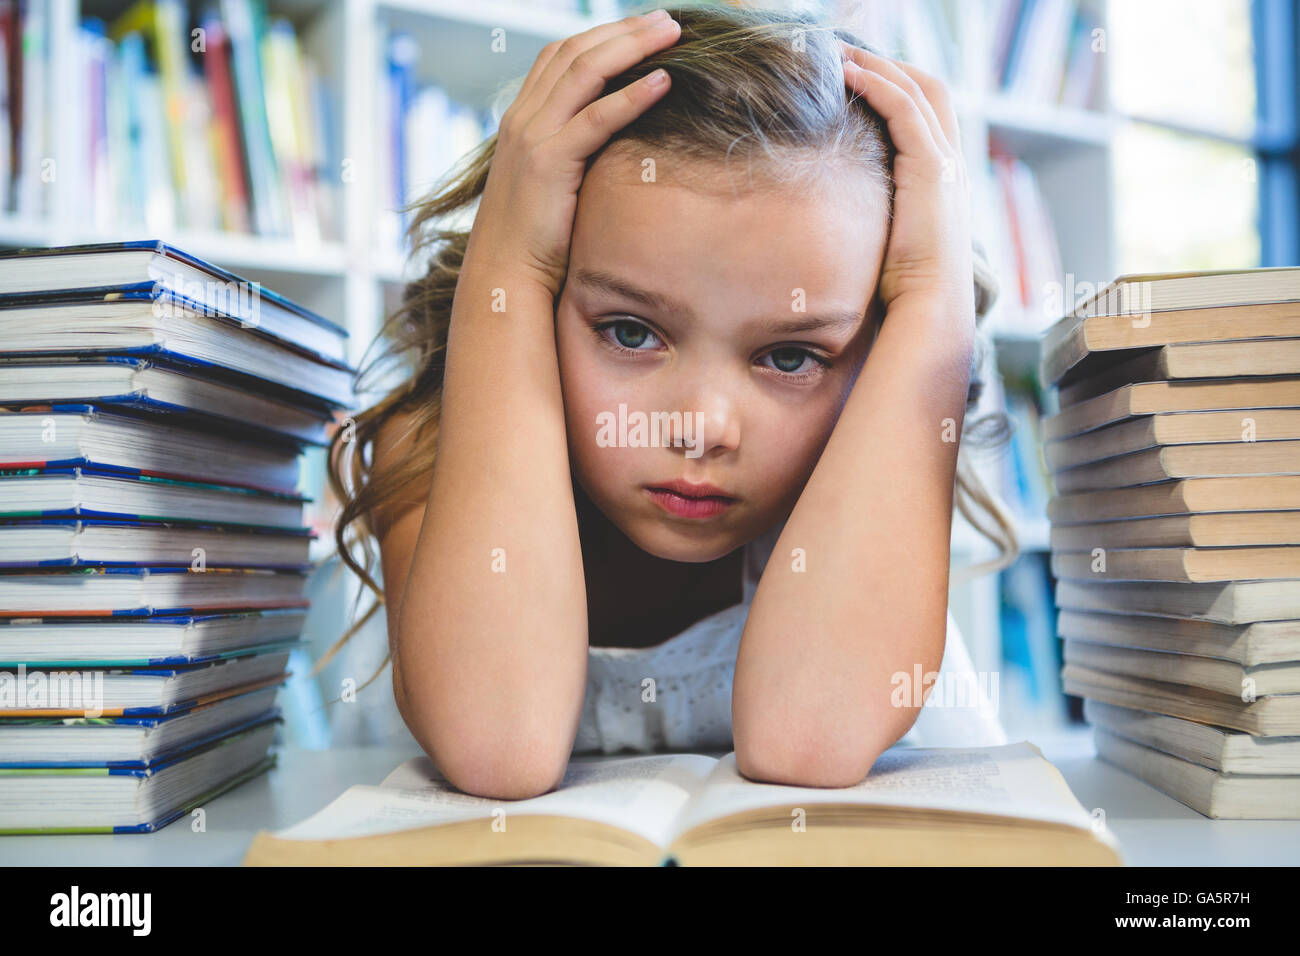 Stressed girl with head in hand at school library Stock Photo